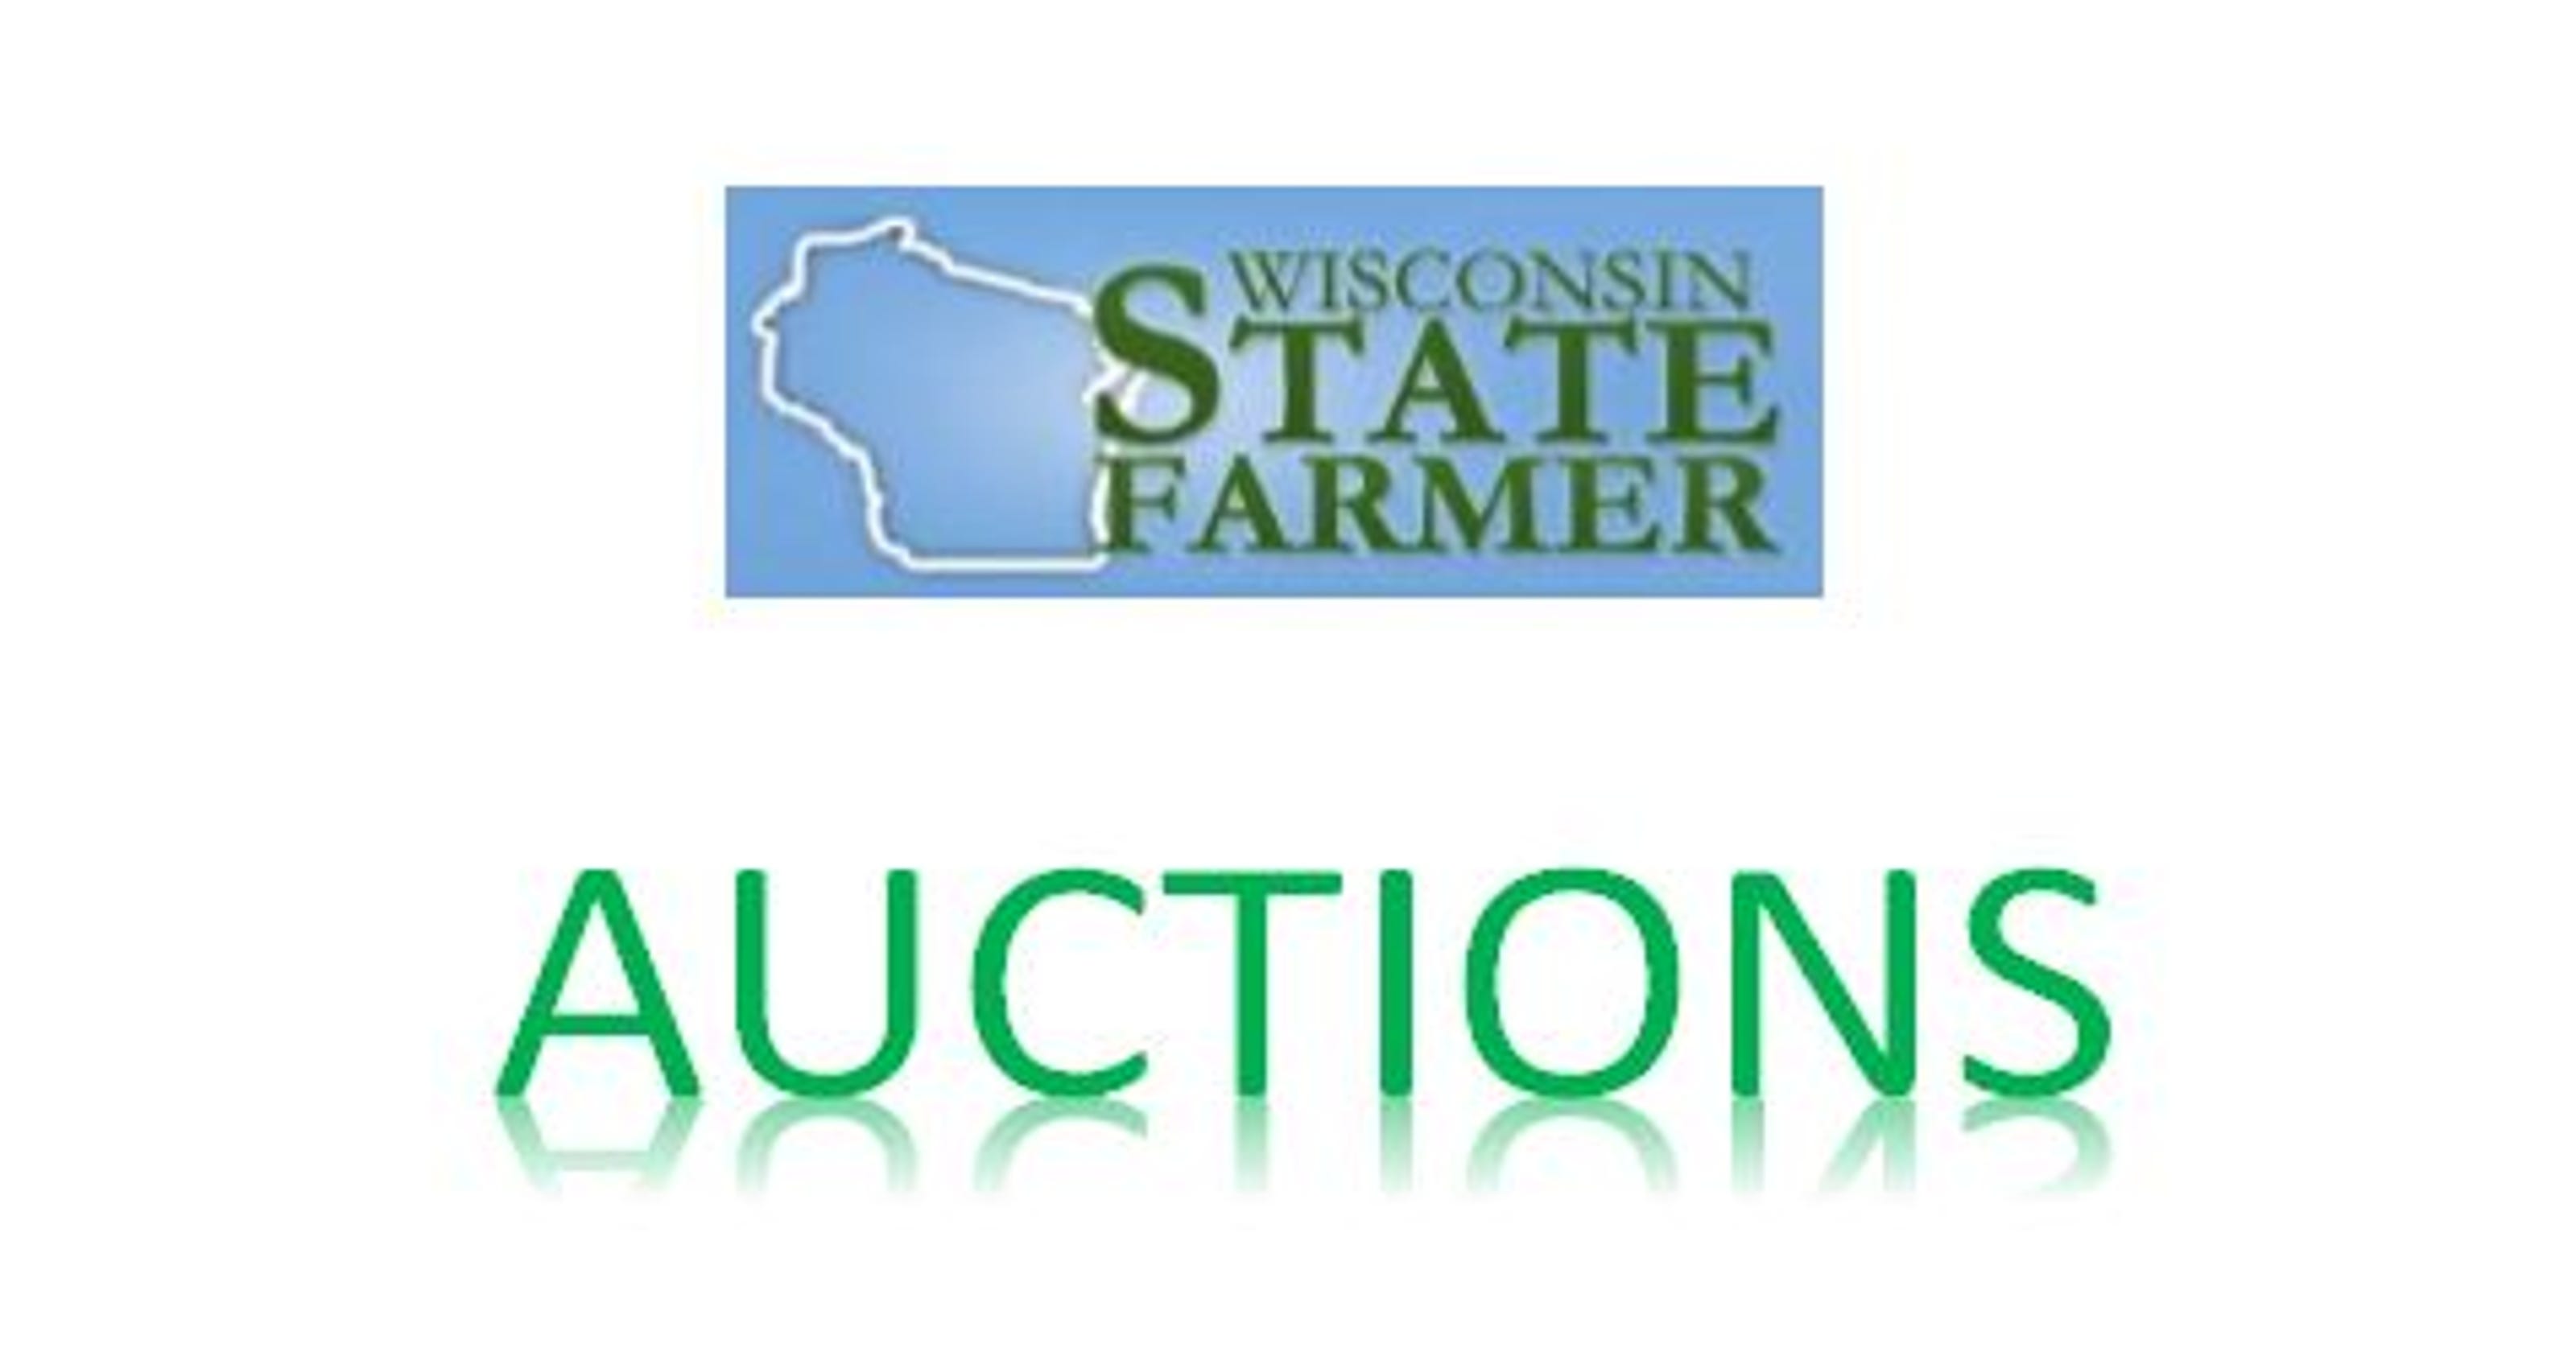 Auctions in this week s Wisconsin State Farmer